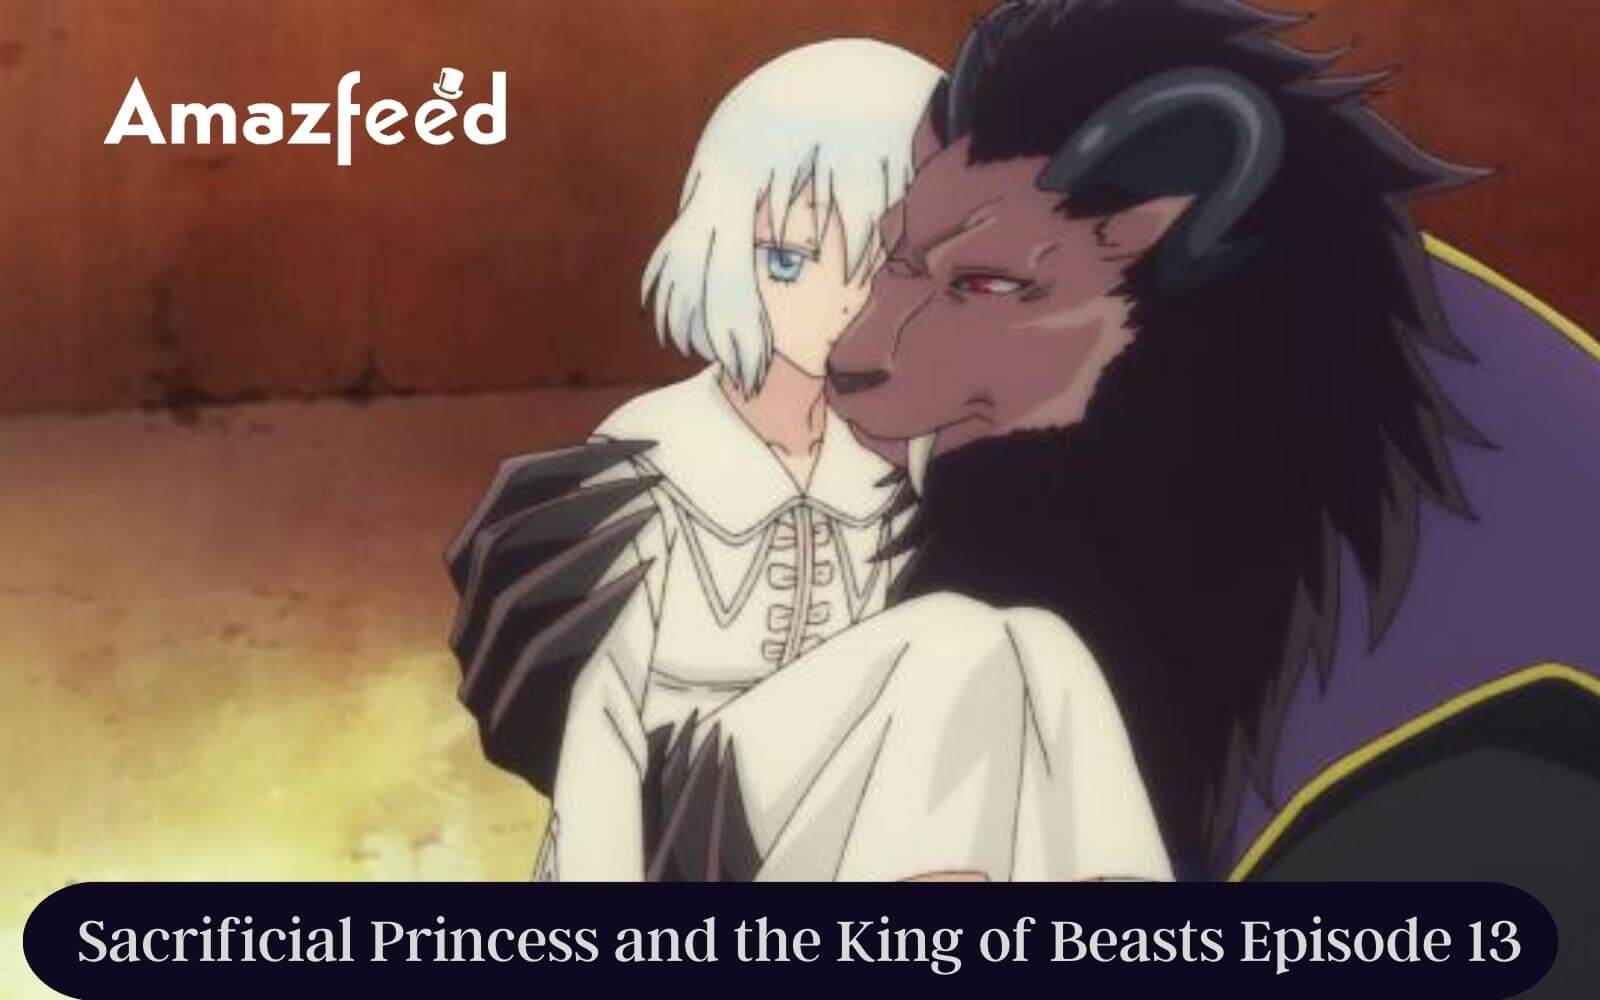 Category:Characters, Sacrificial Princess and the King of Beasts Wiki